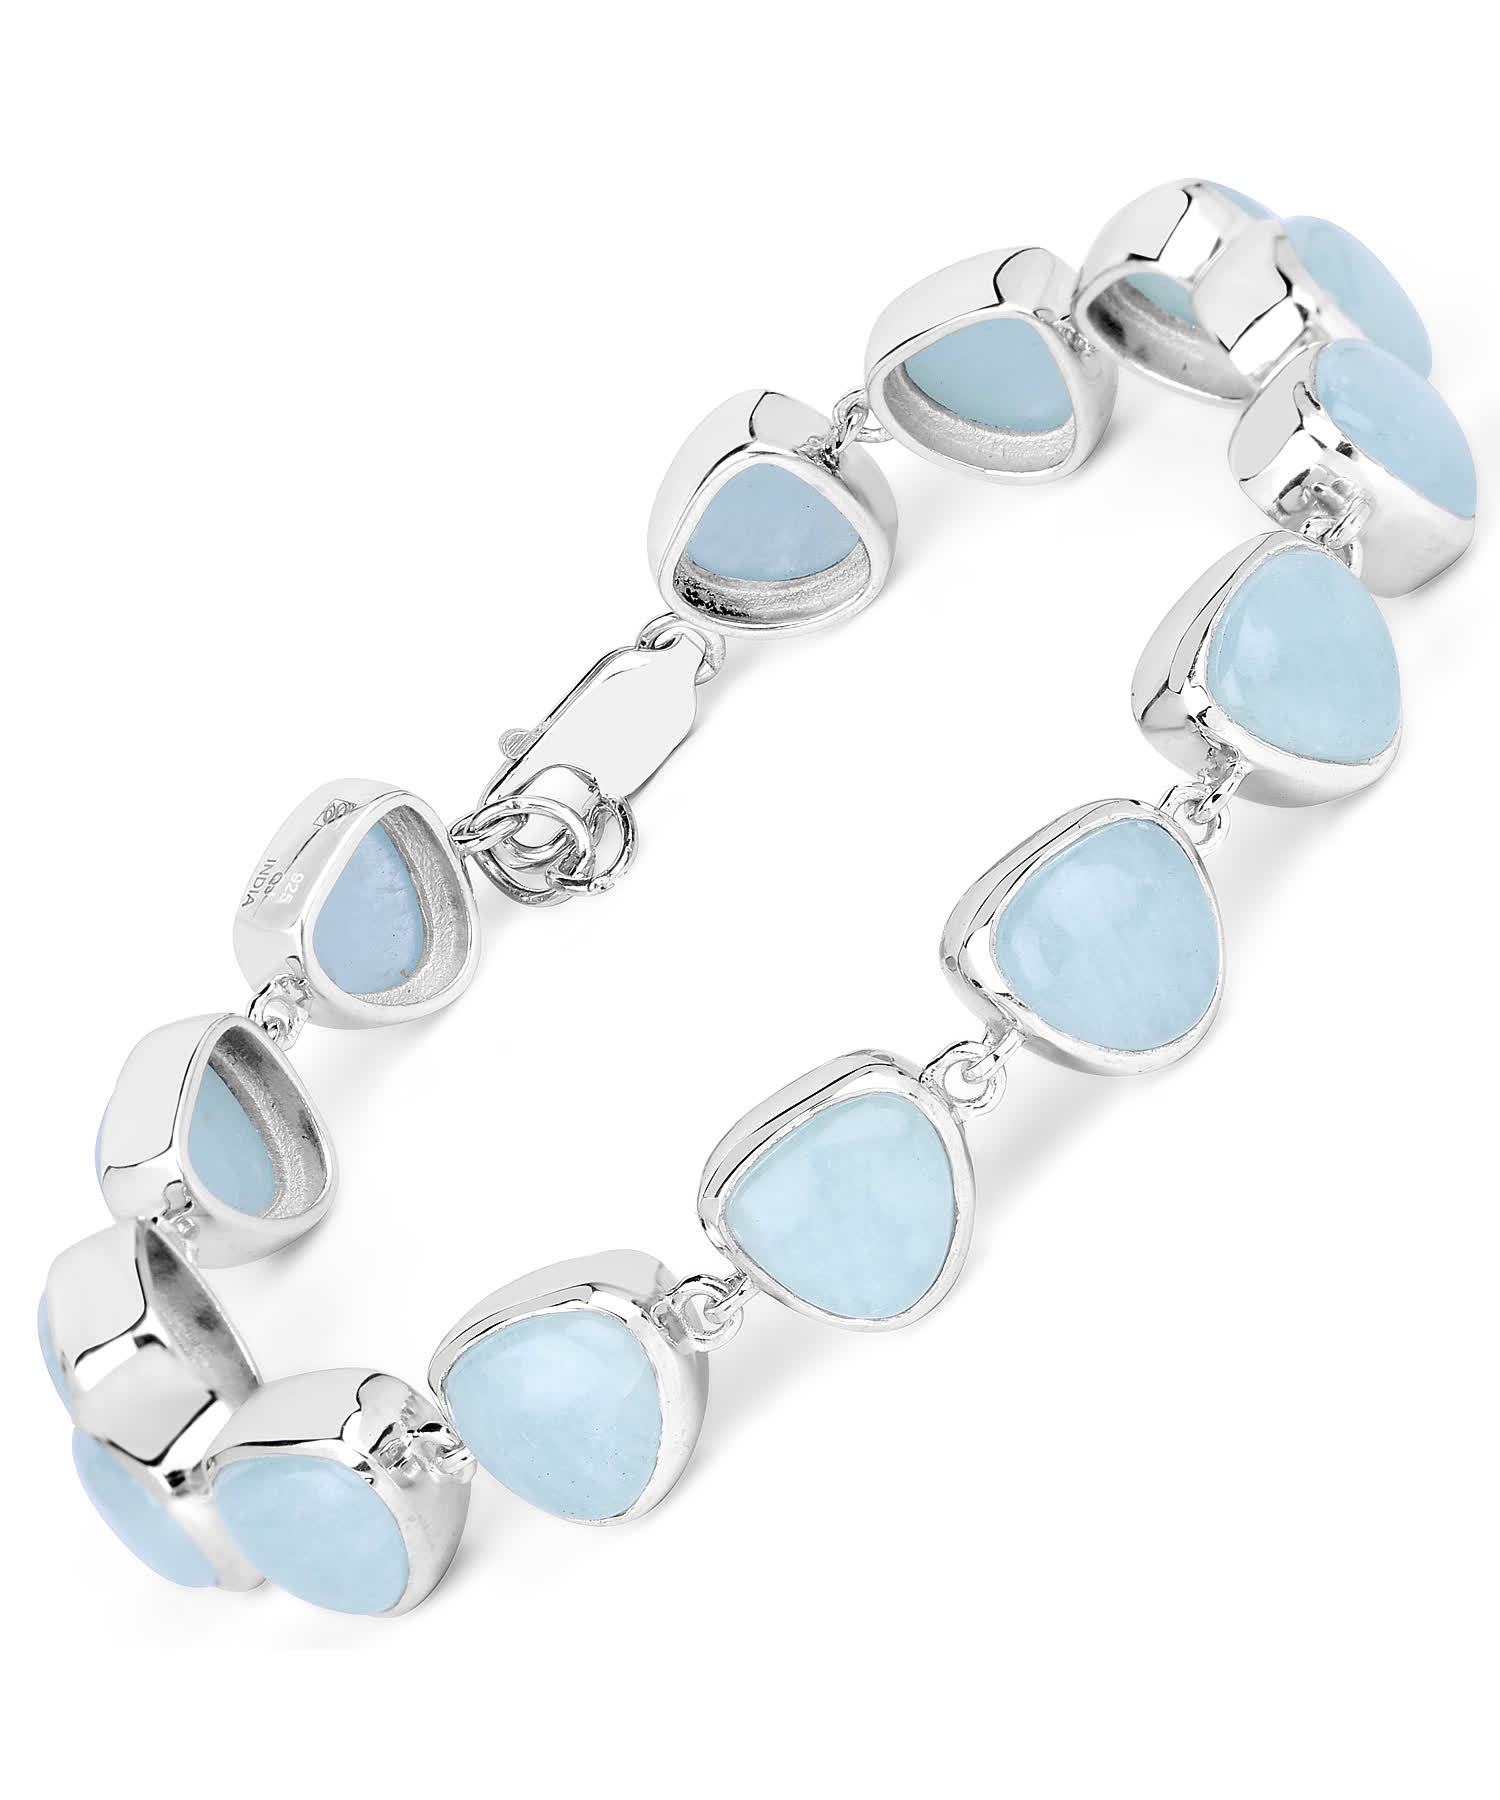 25.90ctw Natural Icy Sky Blue Aquamarine Rhodium Plated 925 Sterling Silver Link Bracelet View 1